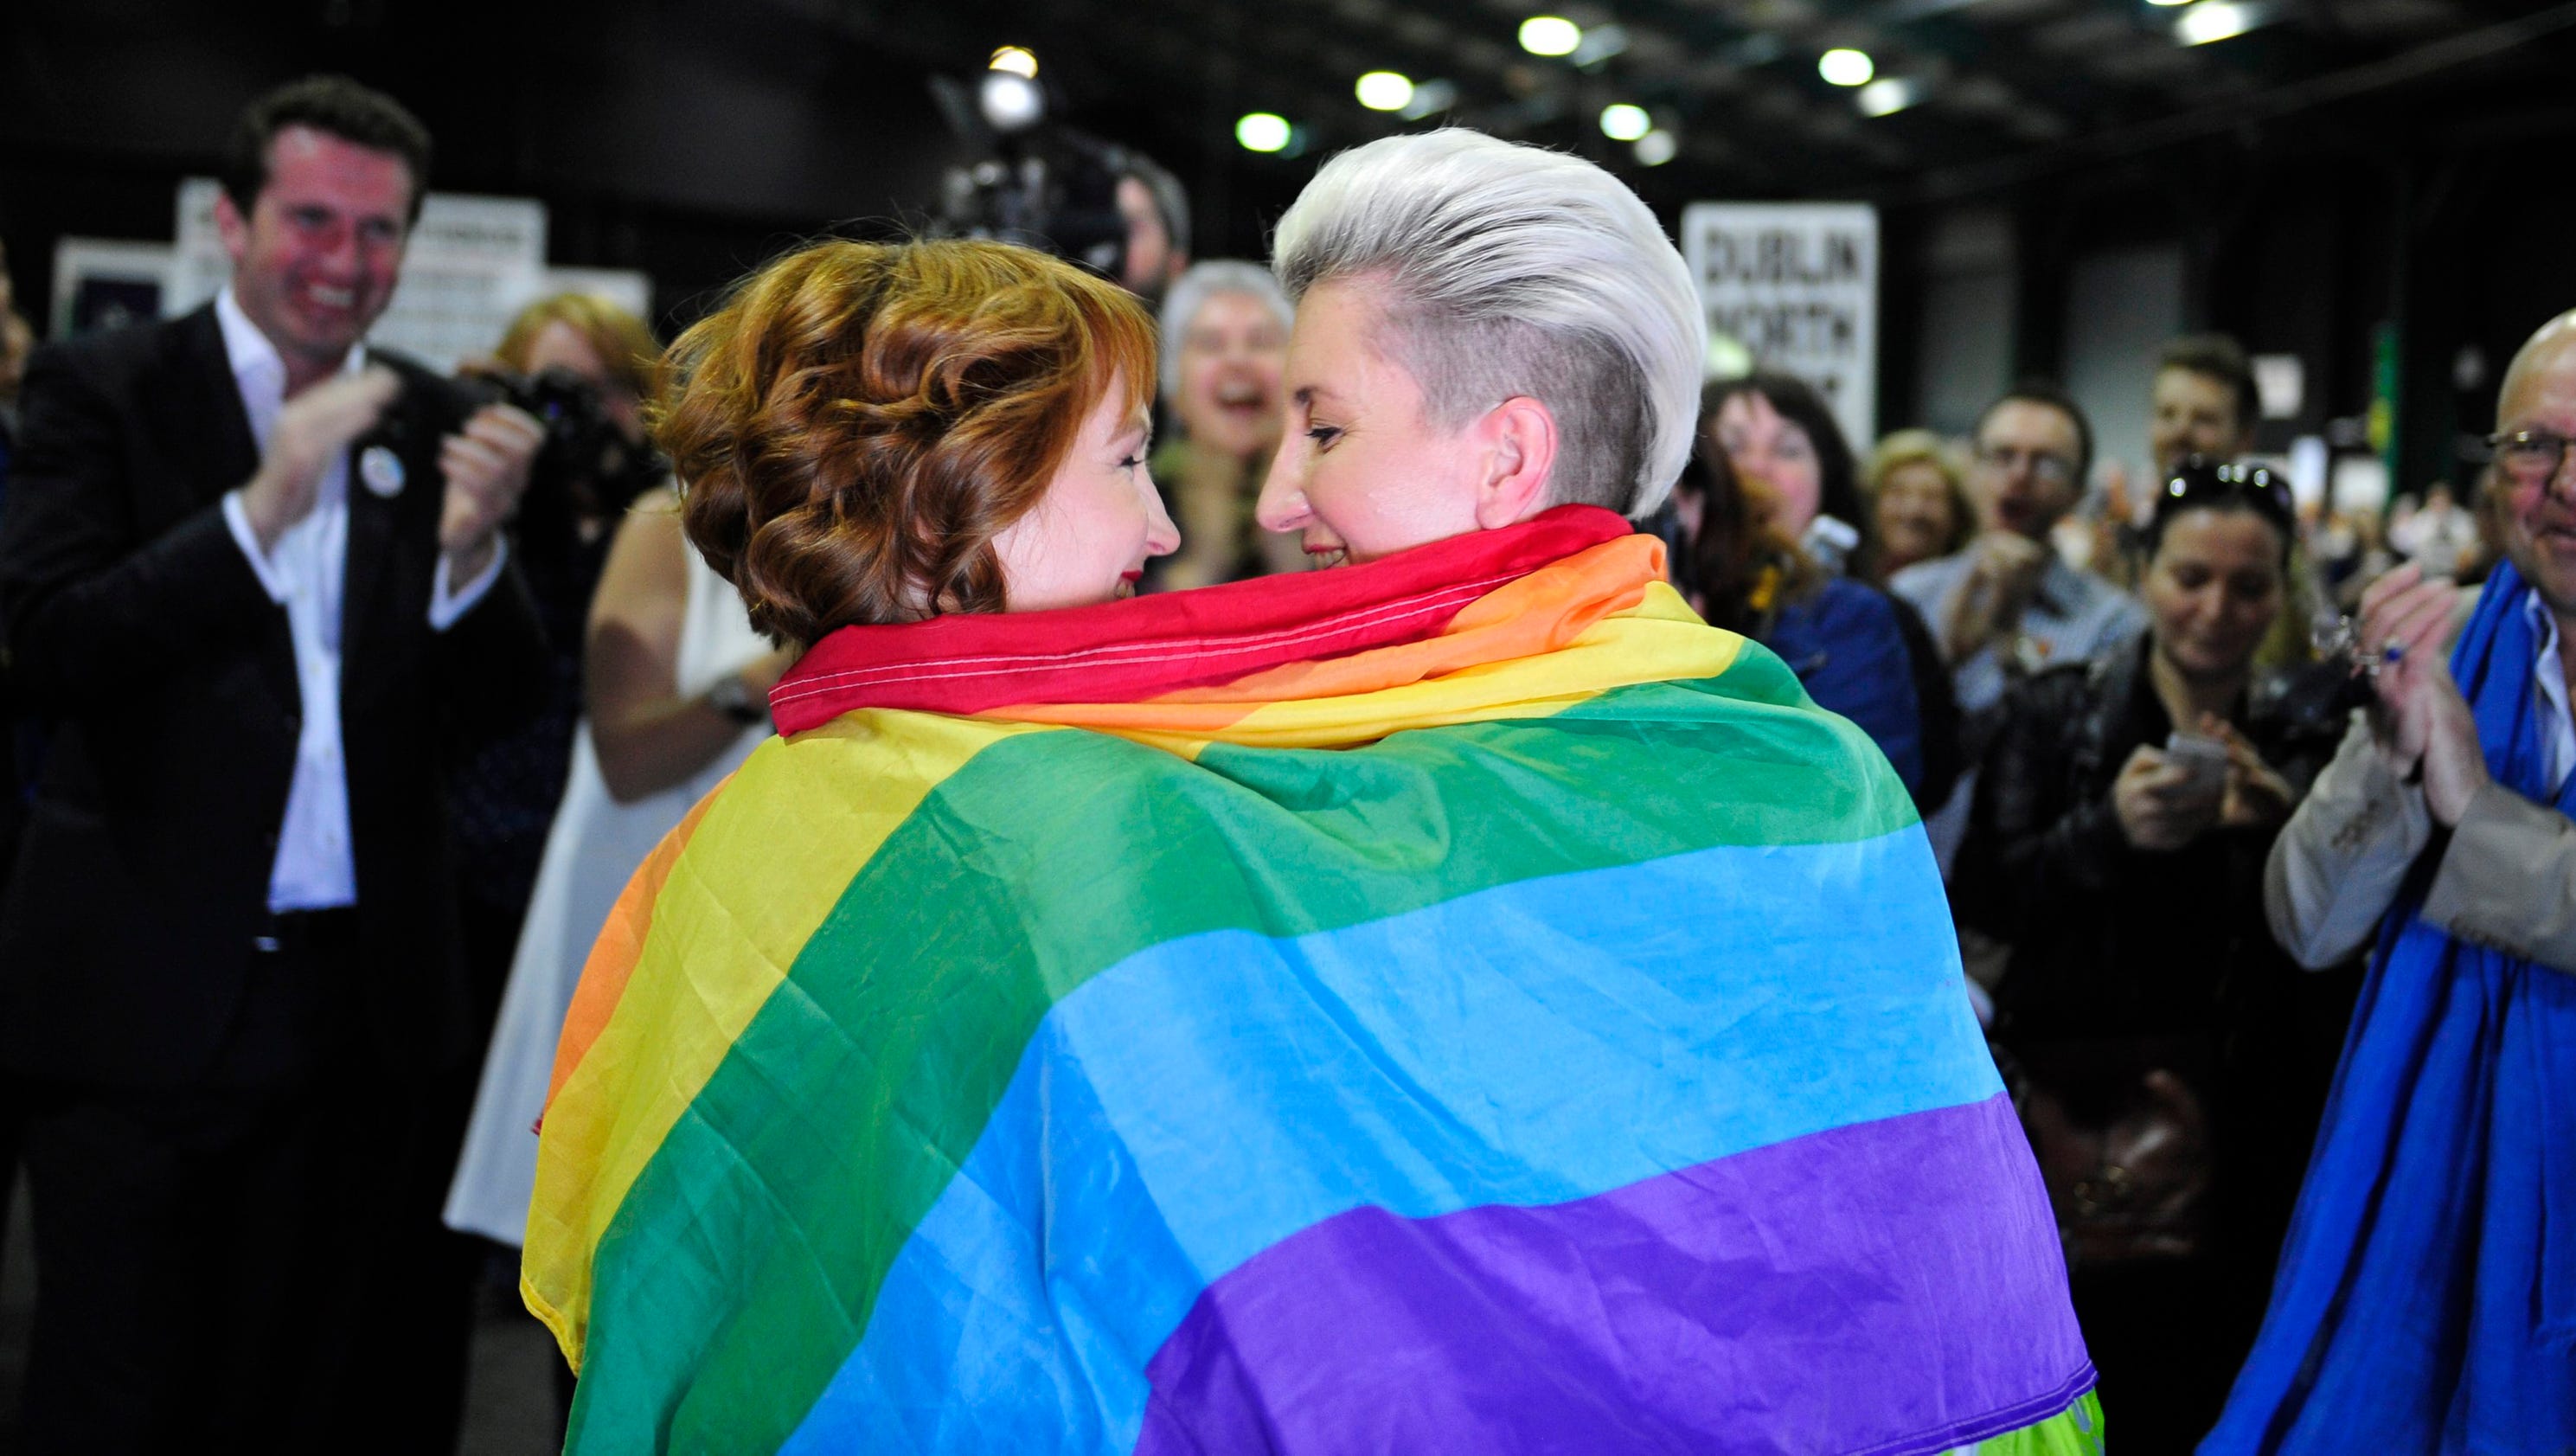 Ireland Legalizes Gay Marriage In Historic Vote Free Hot Nude Porn Pic Gallery